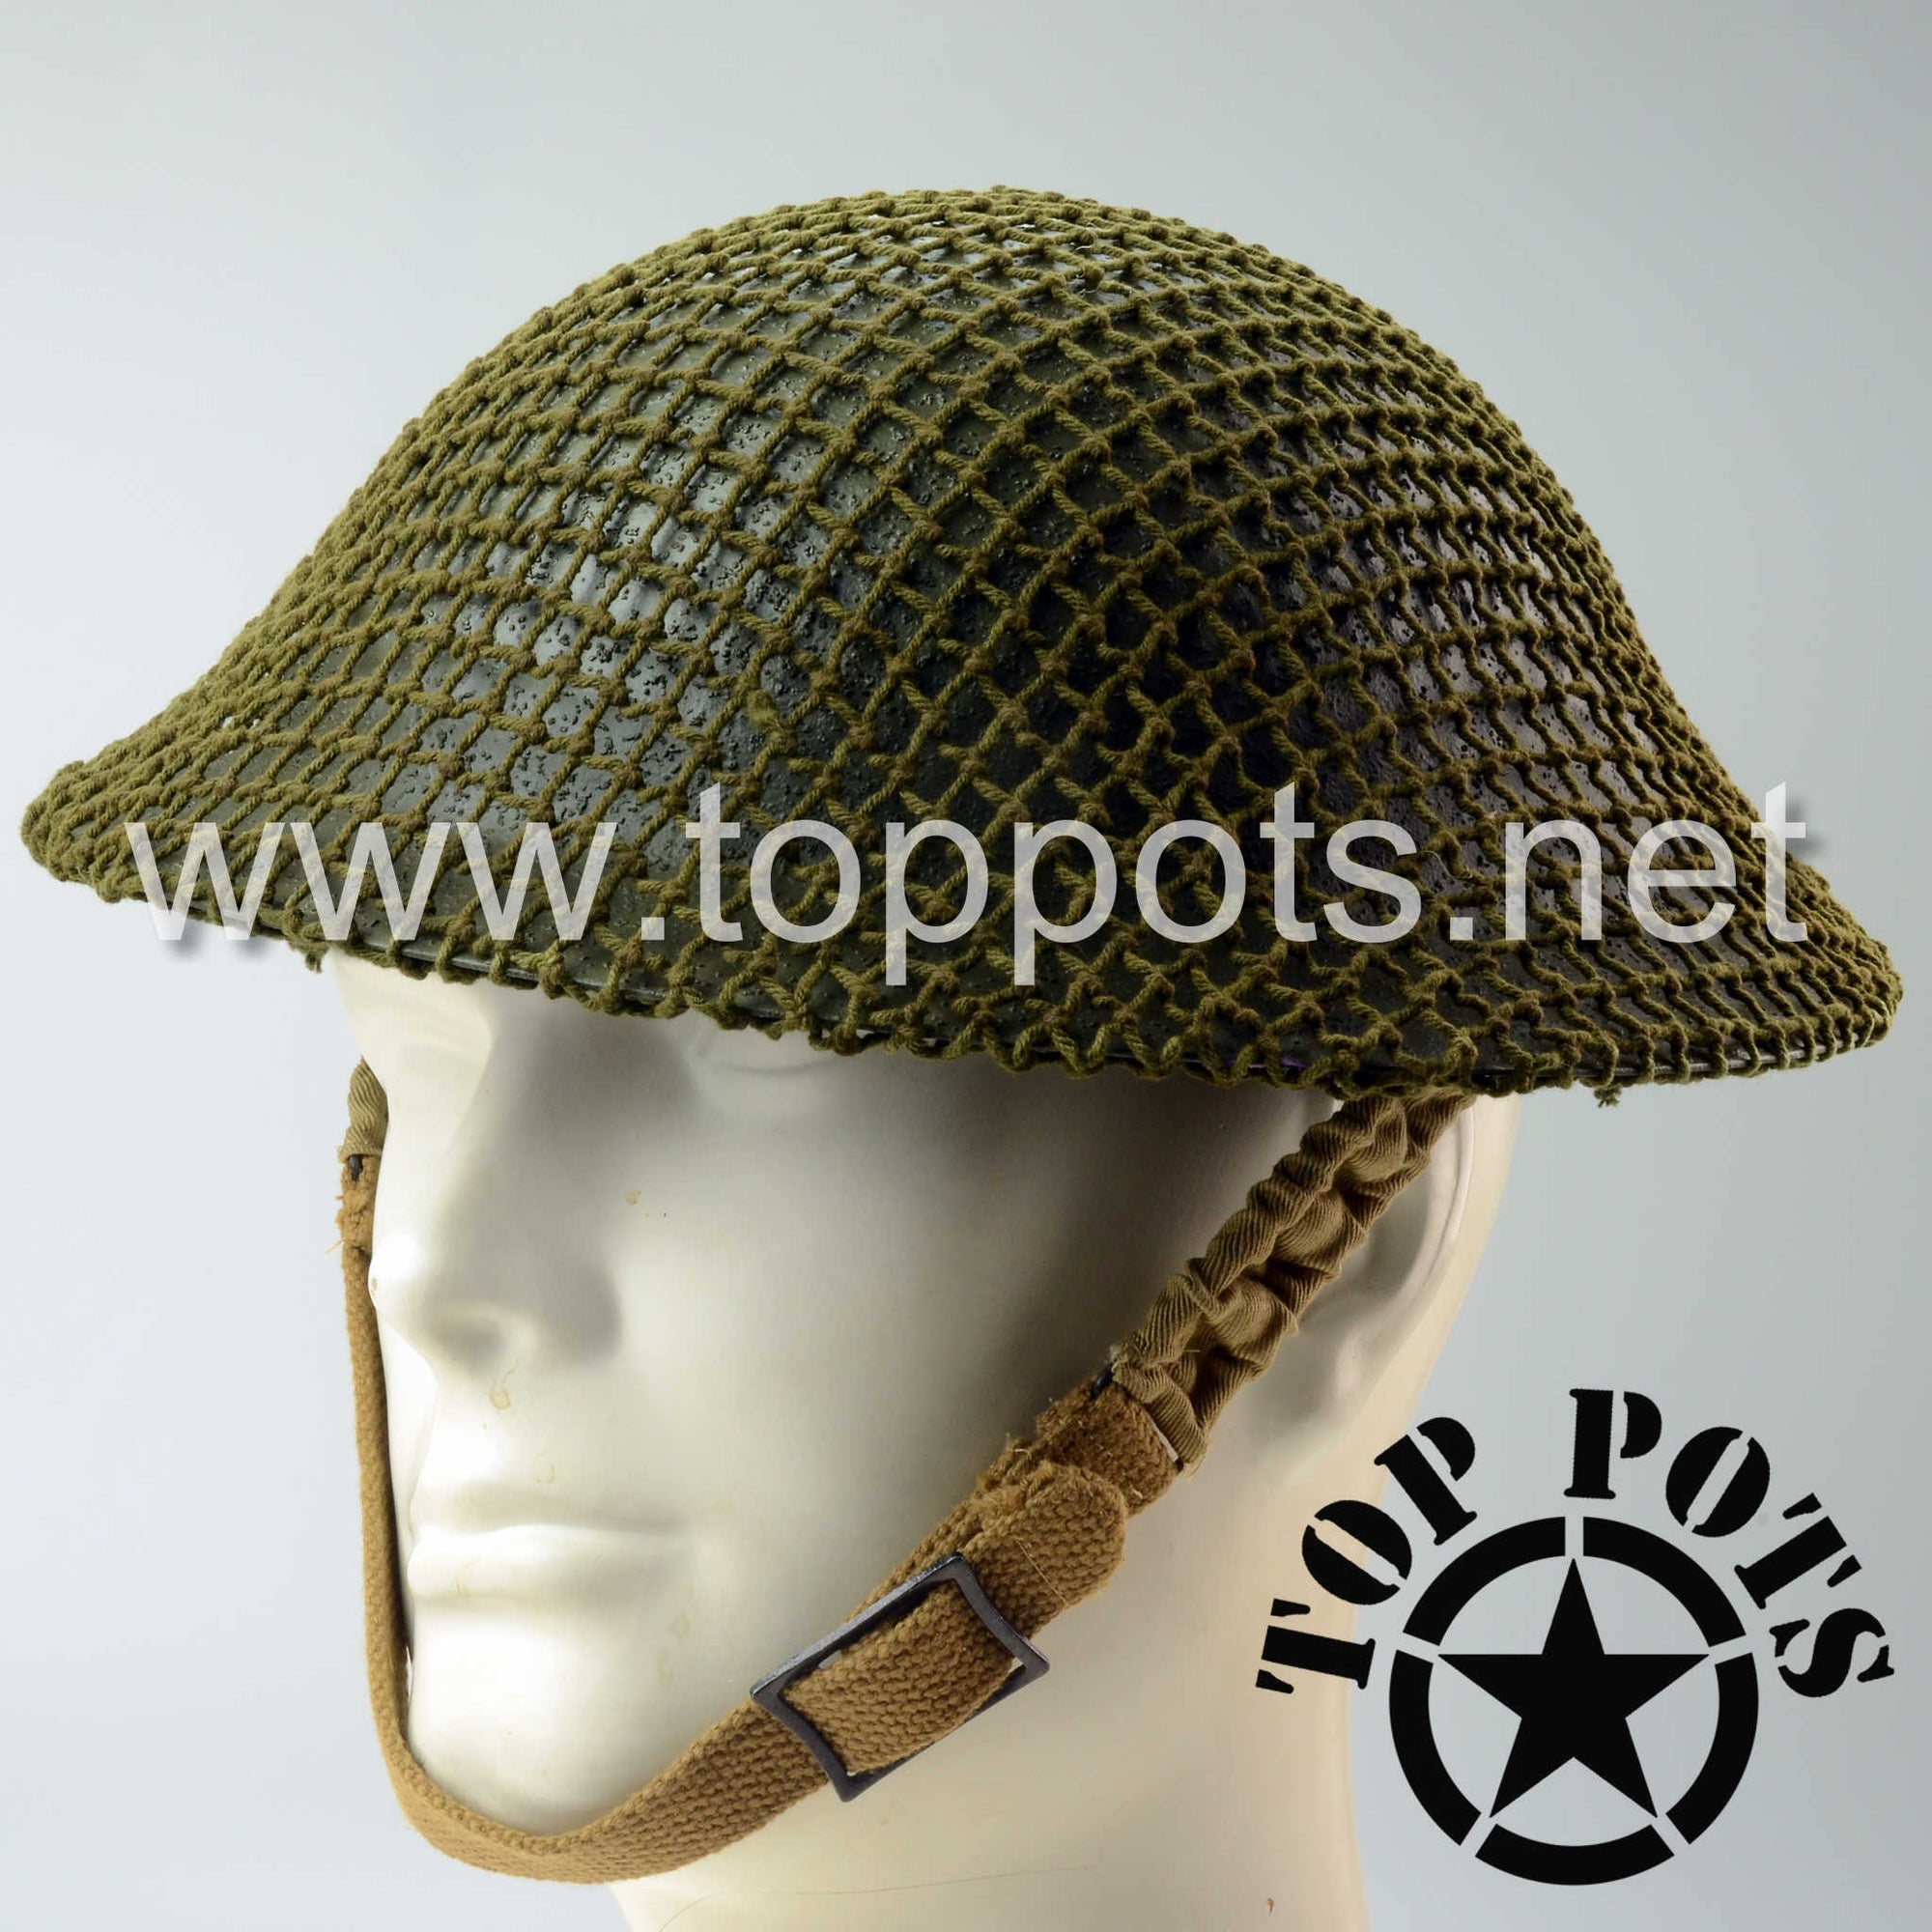 WWII British Army Reproduction MKII MK2 Enlisted Brodie Helmet with Original Helmet Net – Field Textured Finish